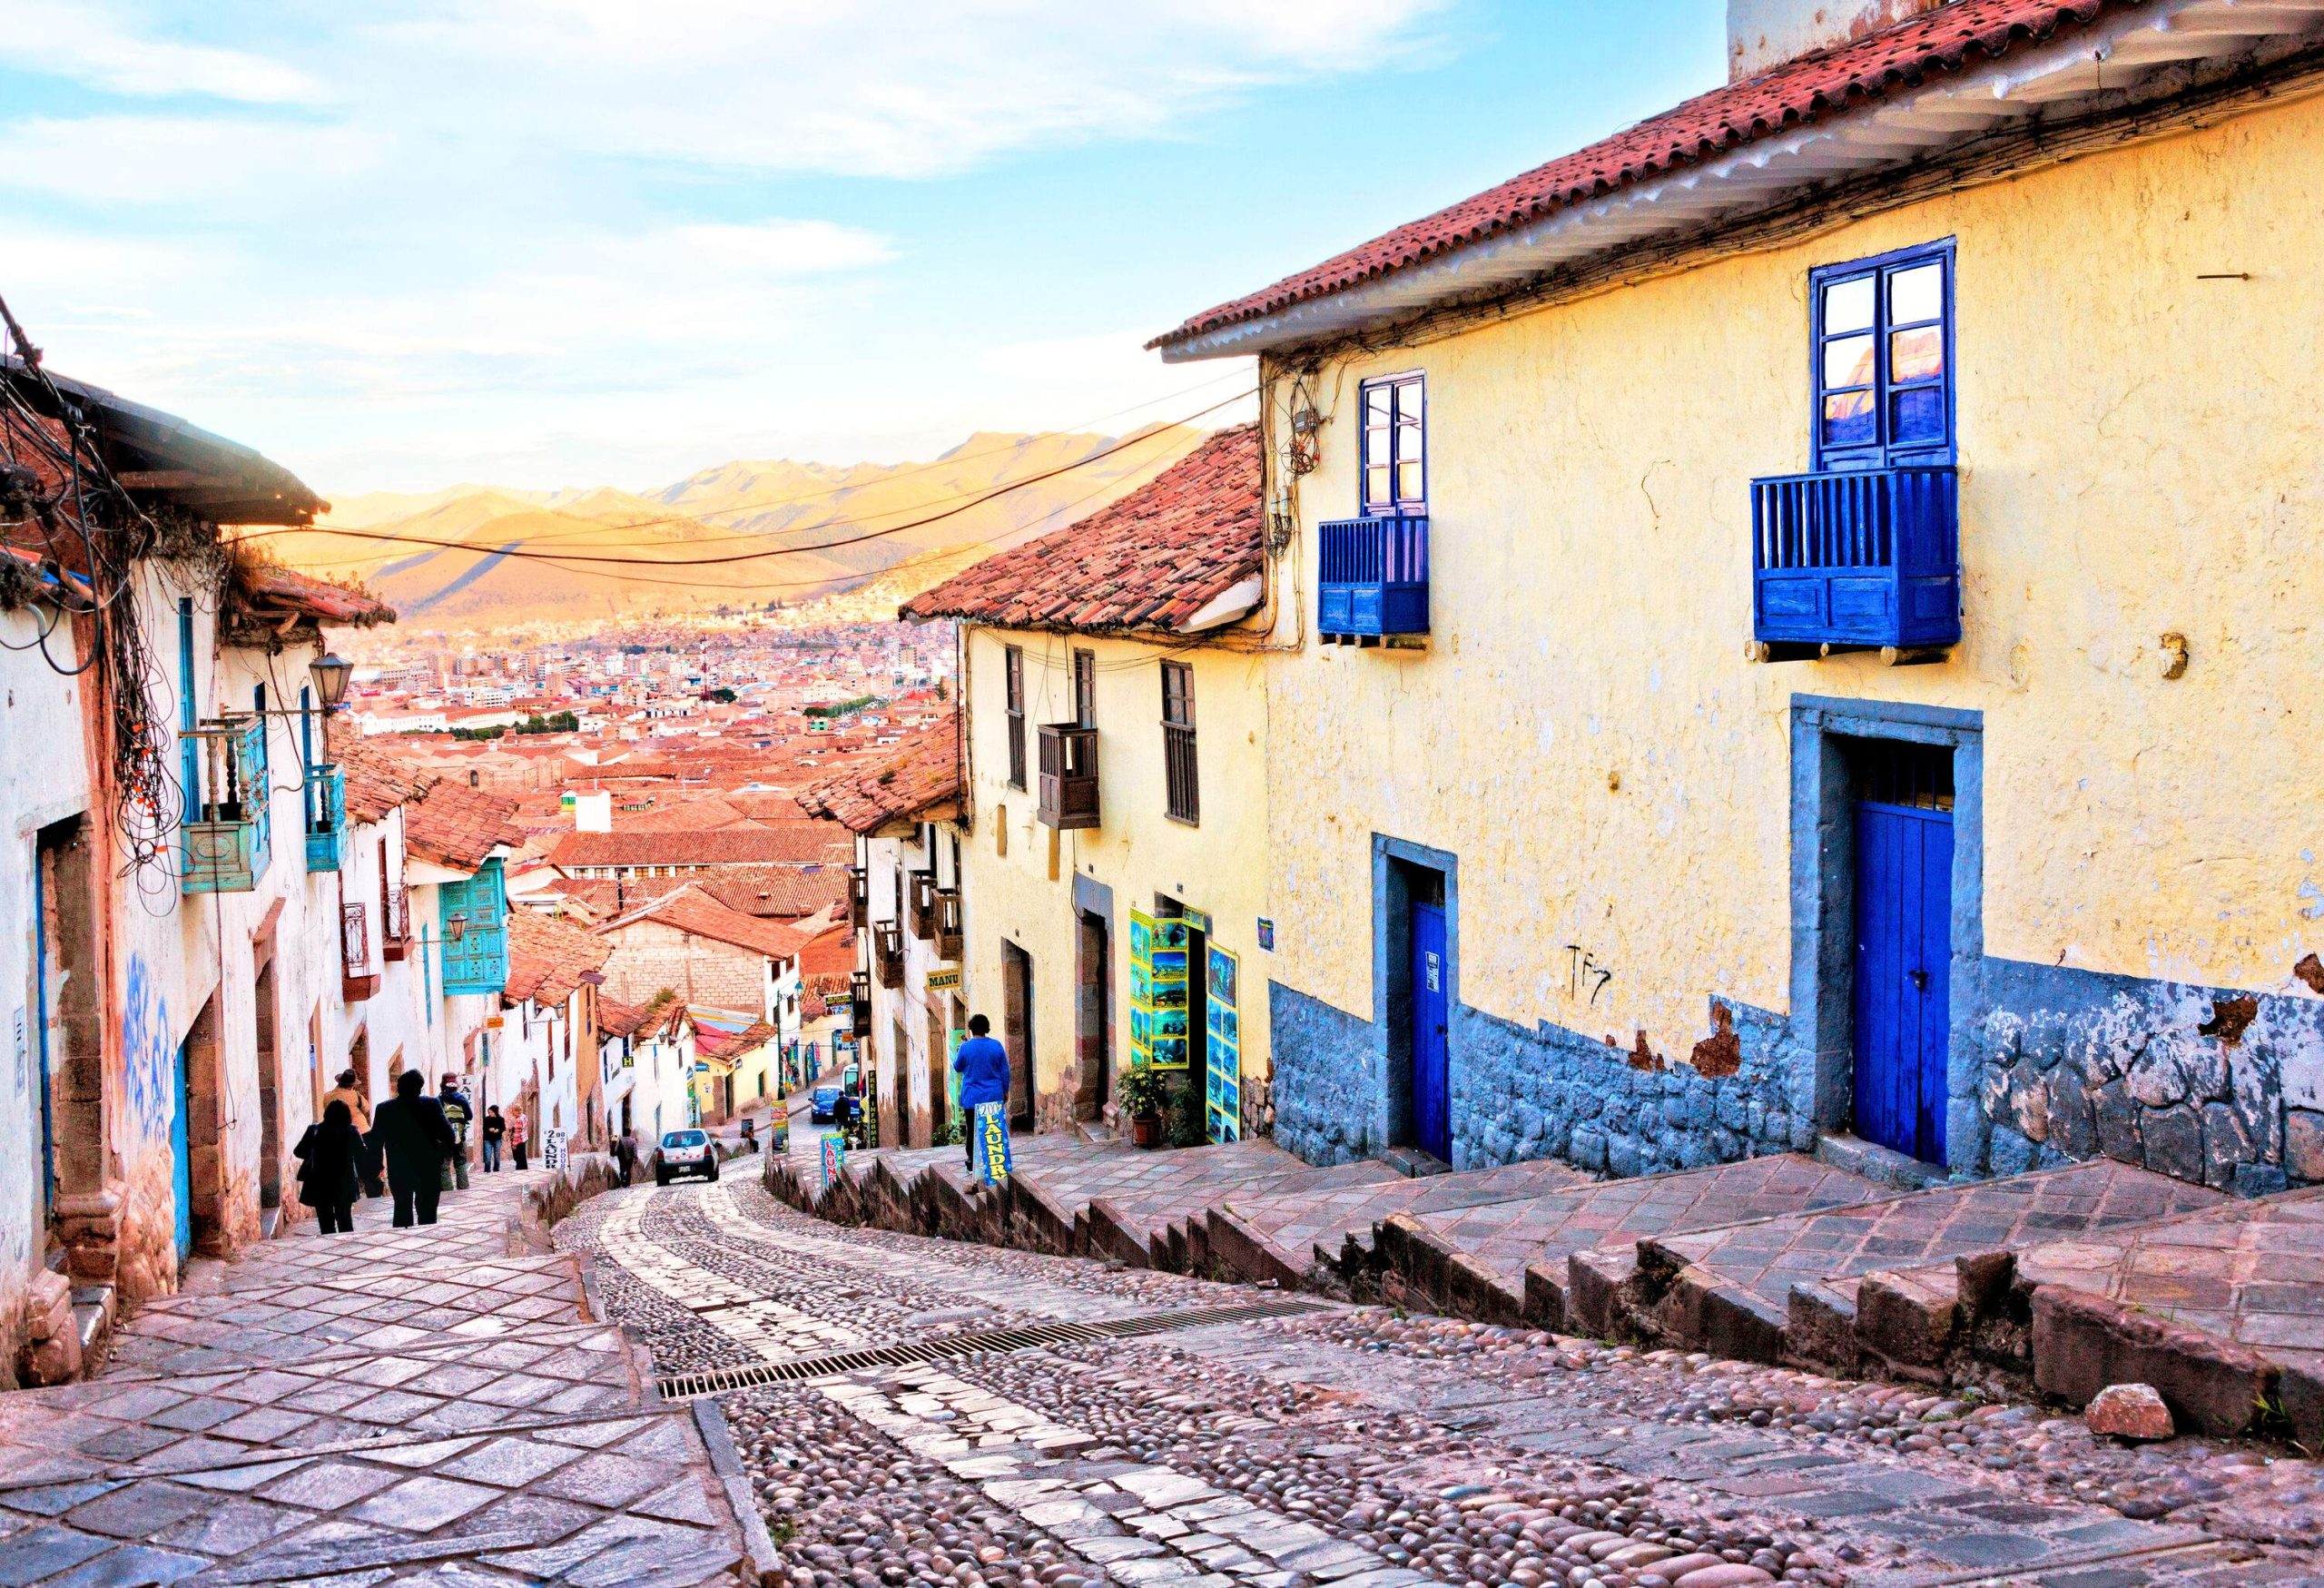 An old village town with people wandering past the buildings along a stone-paved stepped street.